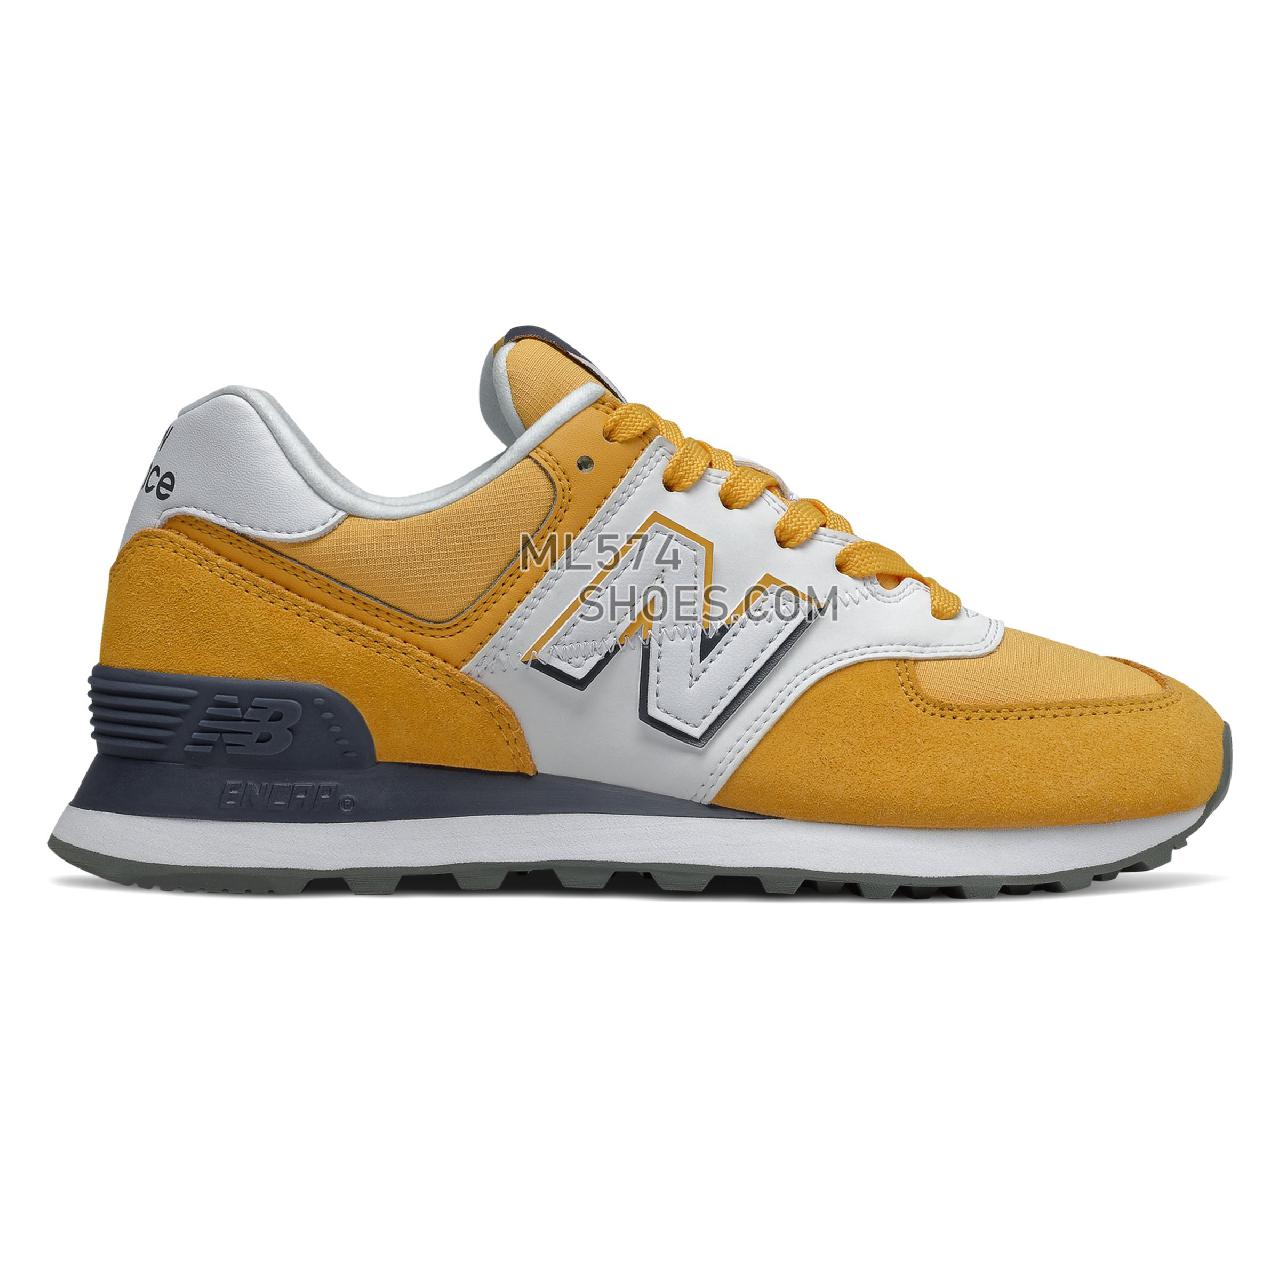 New Balance 574 Split Sail - Women's Classic Sneakers - White with Yellow - WL574NJD